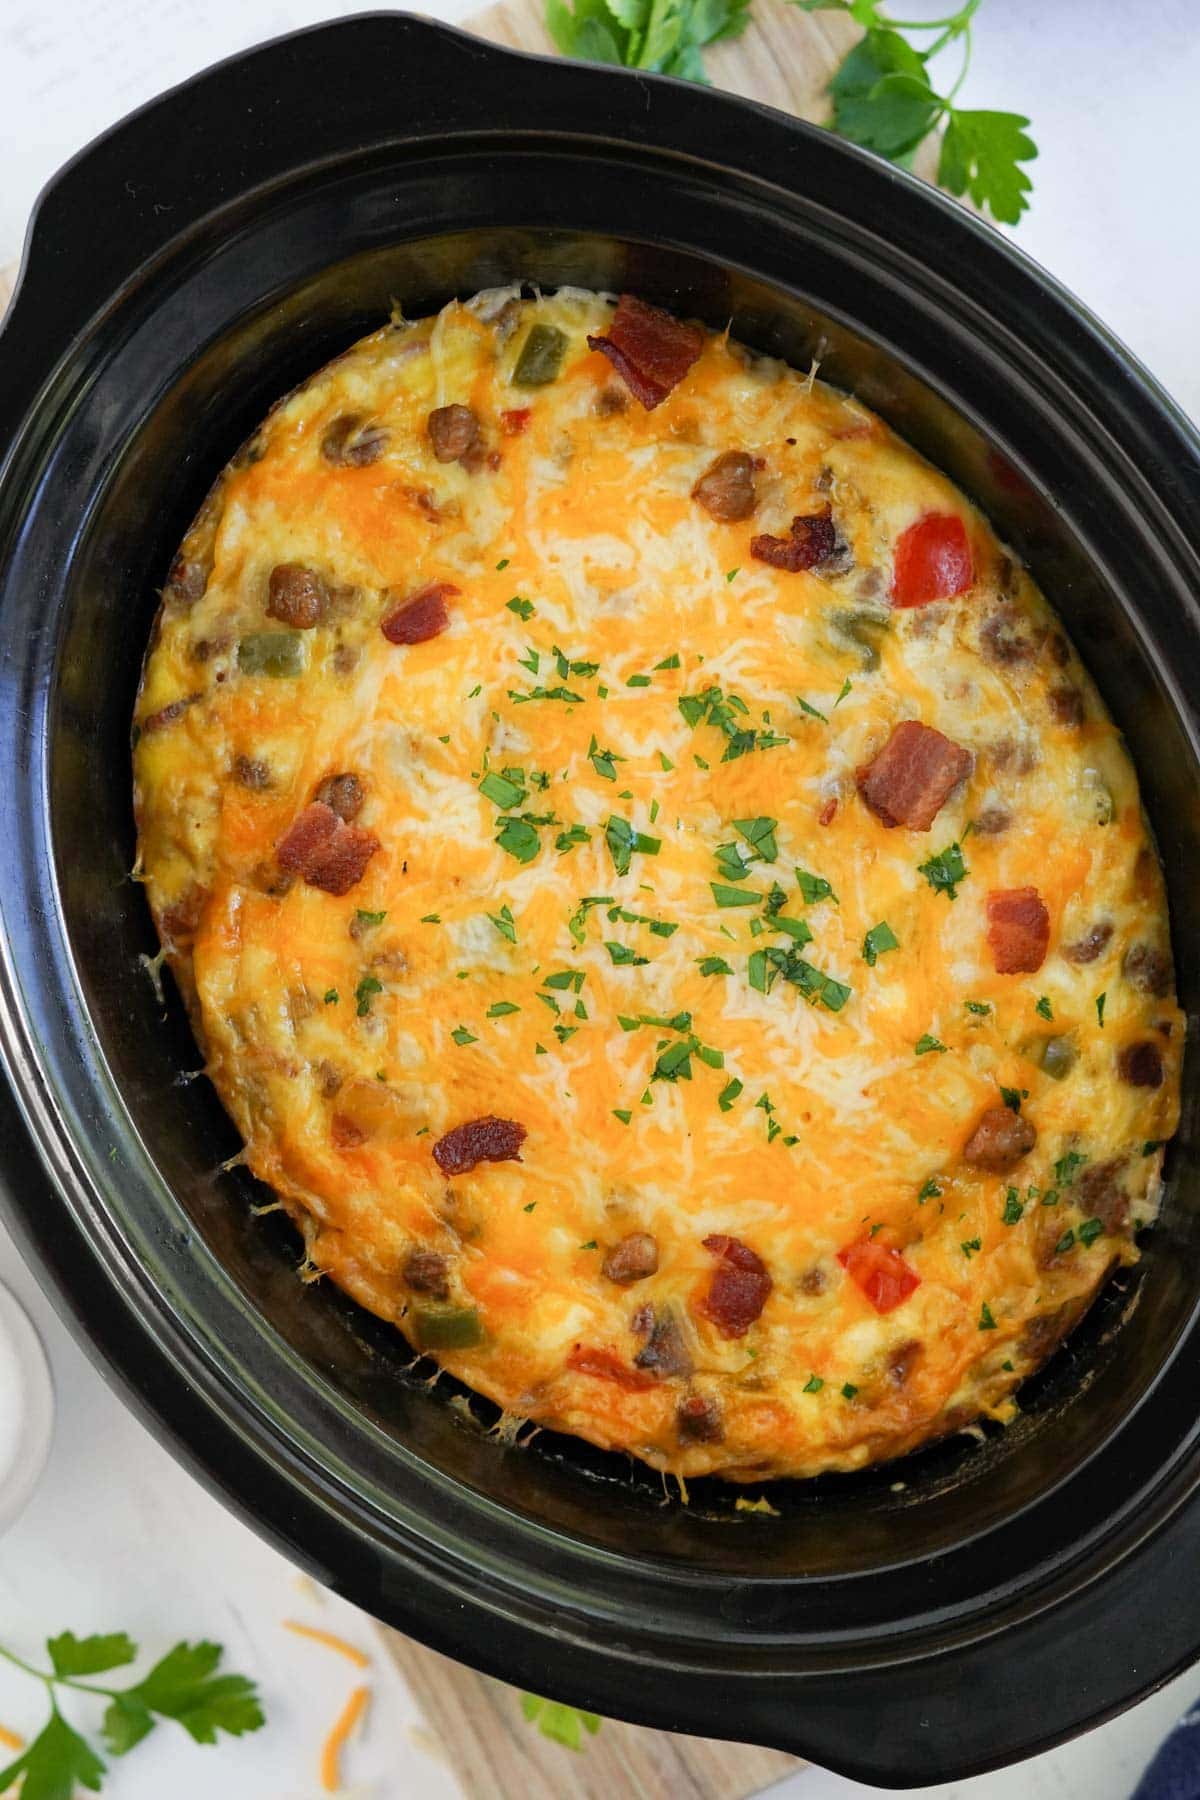 Slow Cooker Breakfast Casserole - Eat at Home